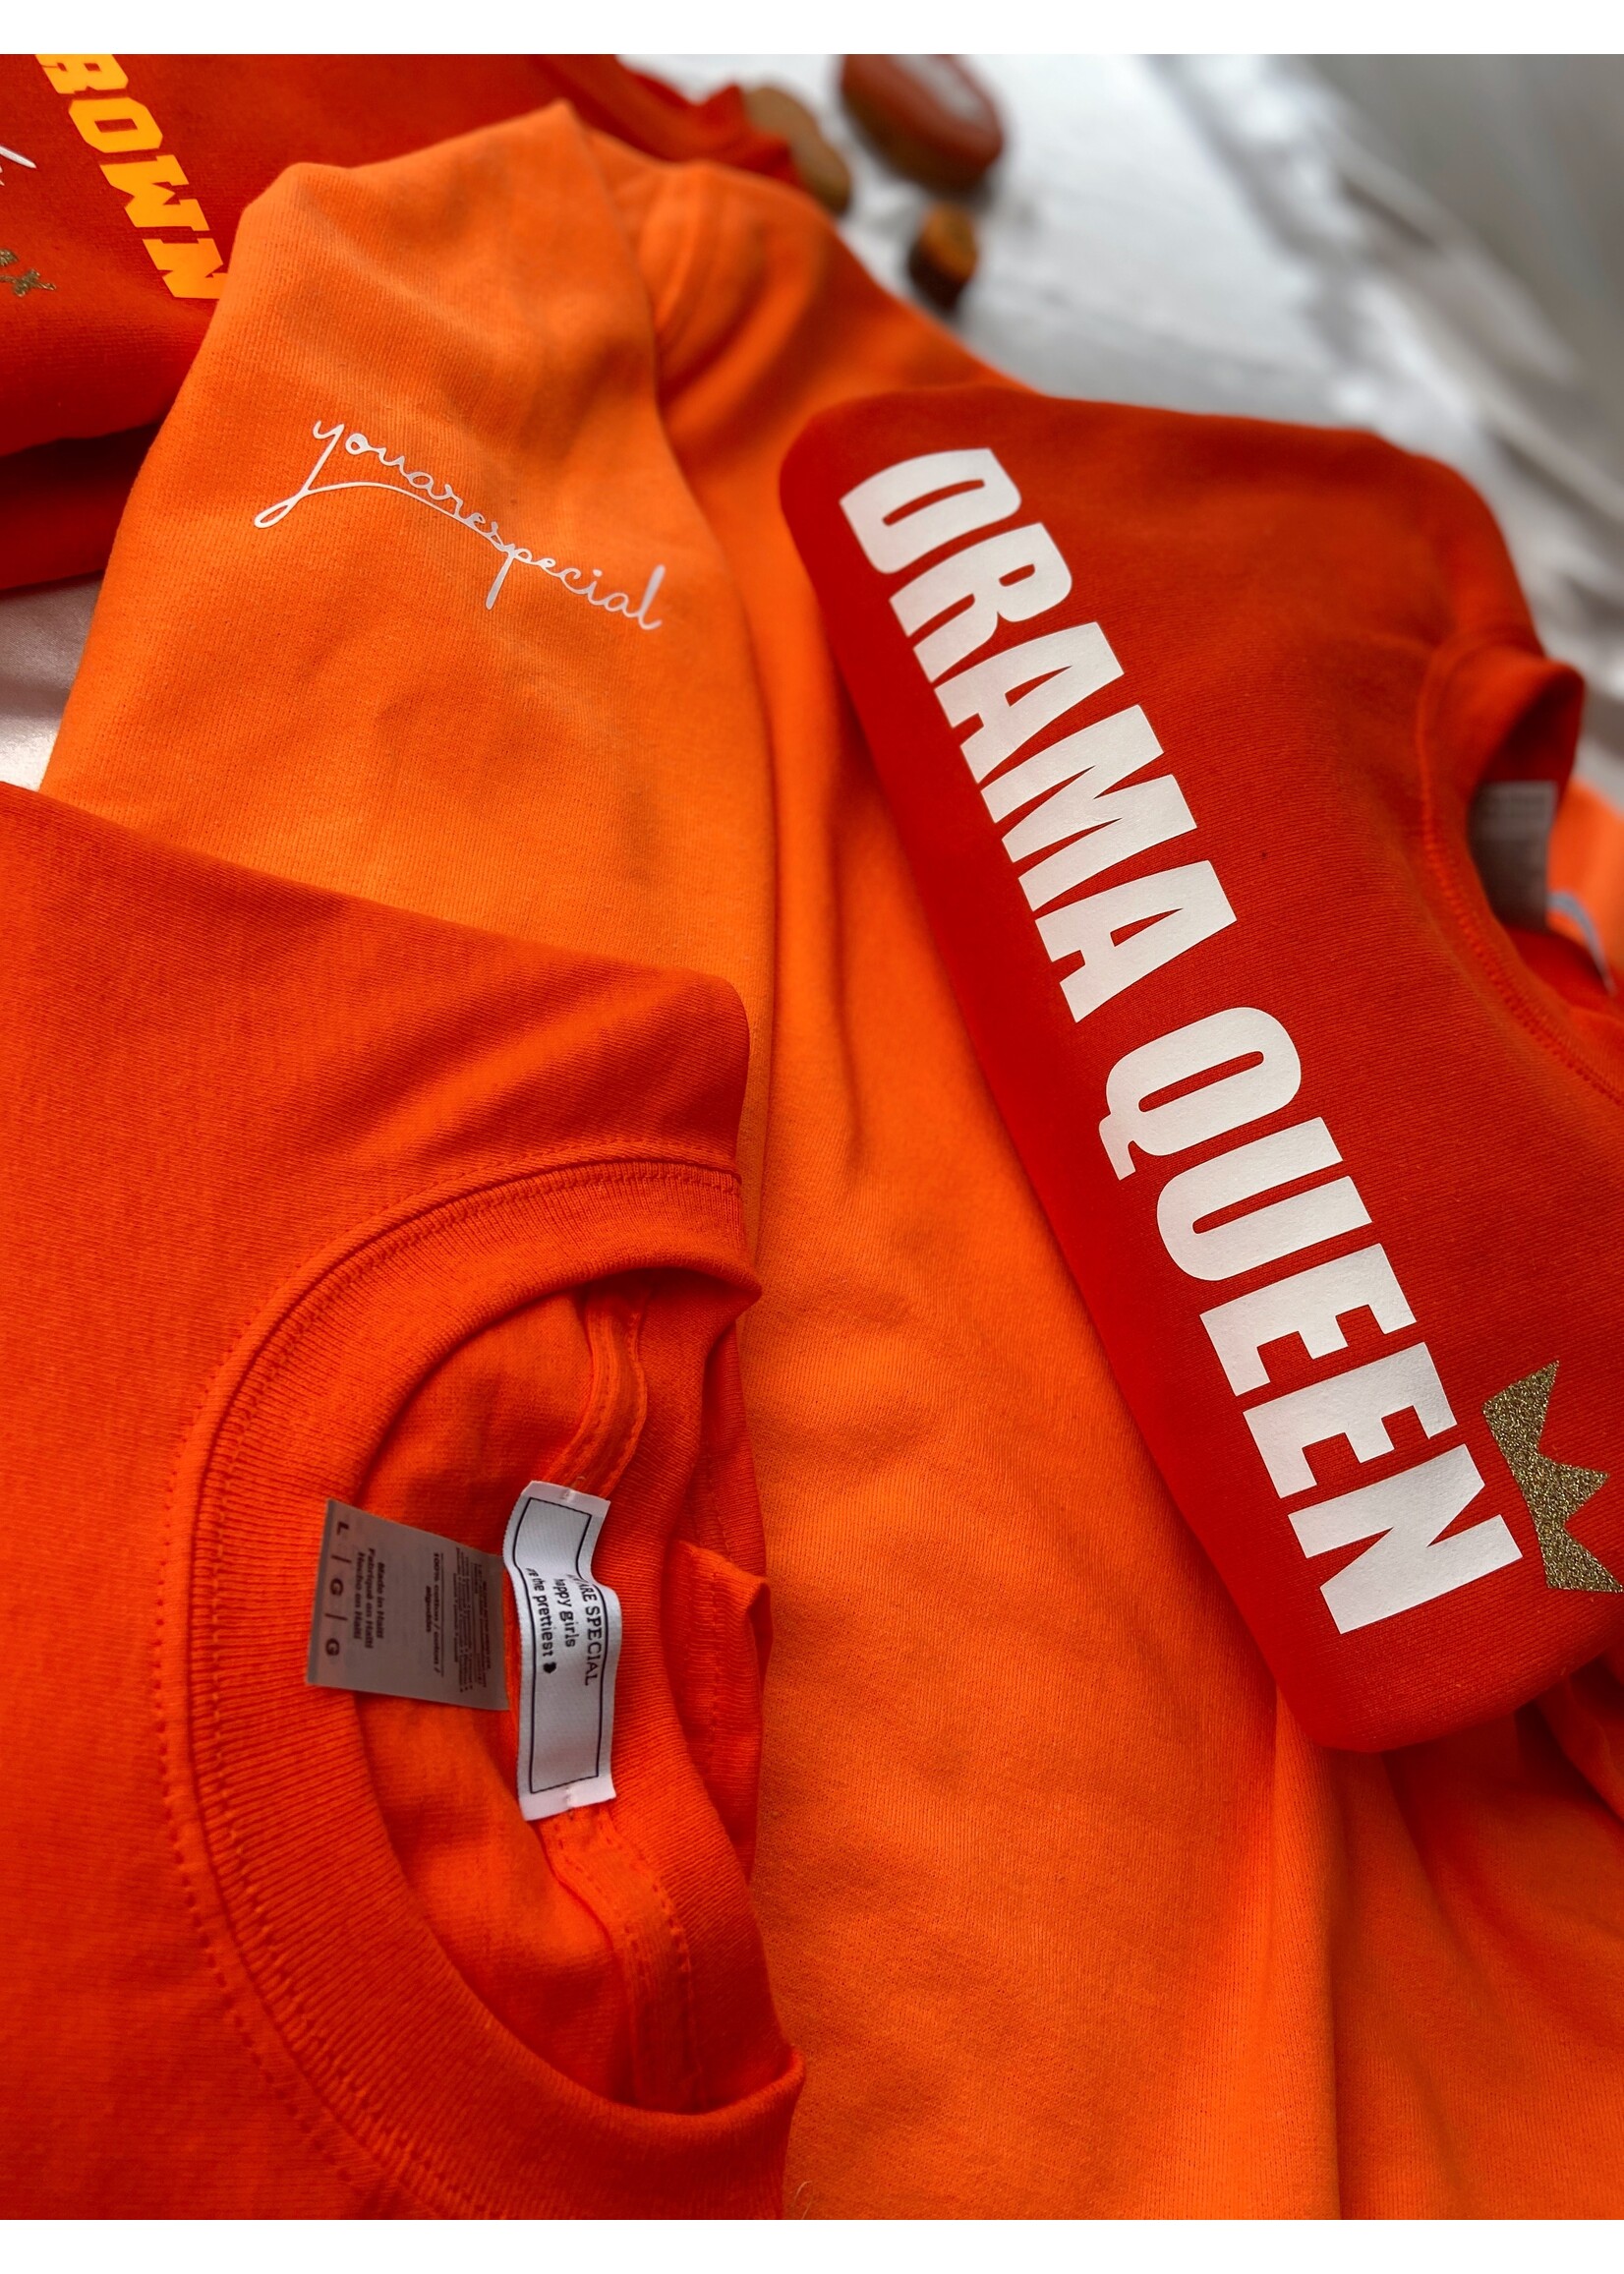 YOU ARE SPECIAL "Drama Queen" Orange Sweater